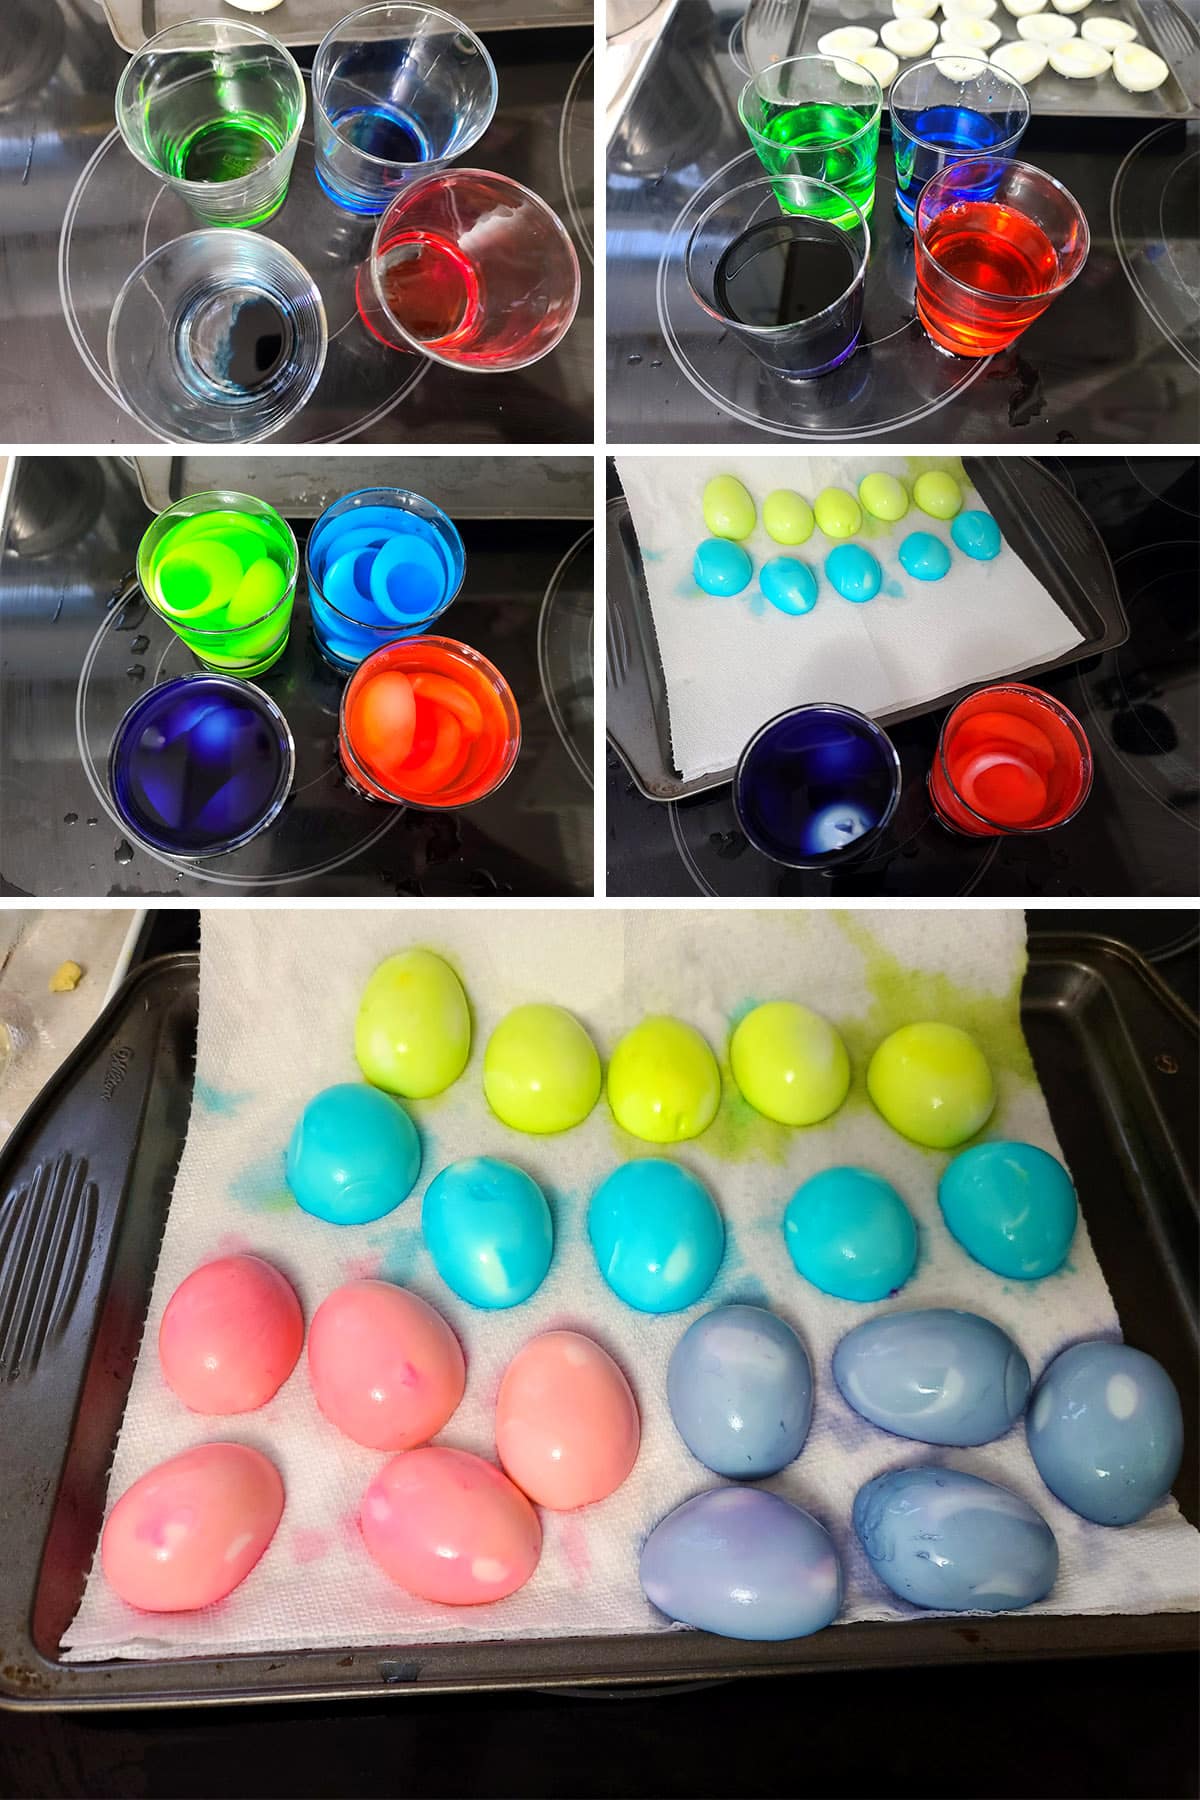 A 5 part image showing the dyes being mixed in glasses, egg whites being dyed, and colorful egg whites draining on paper towels.